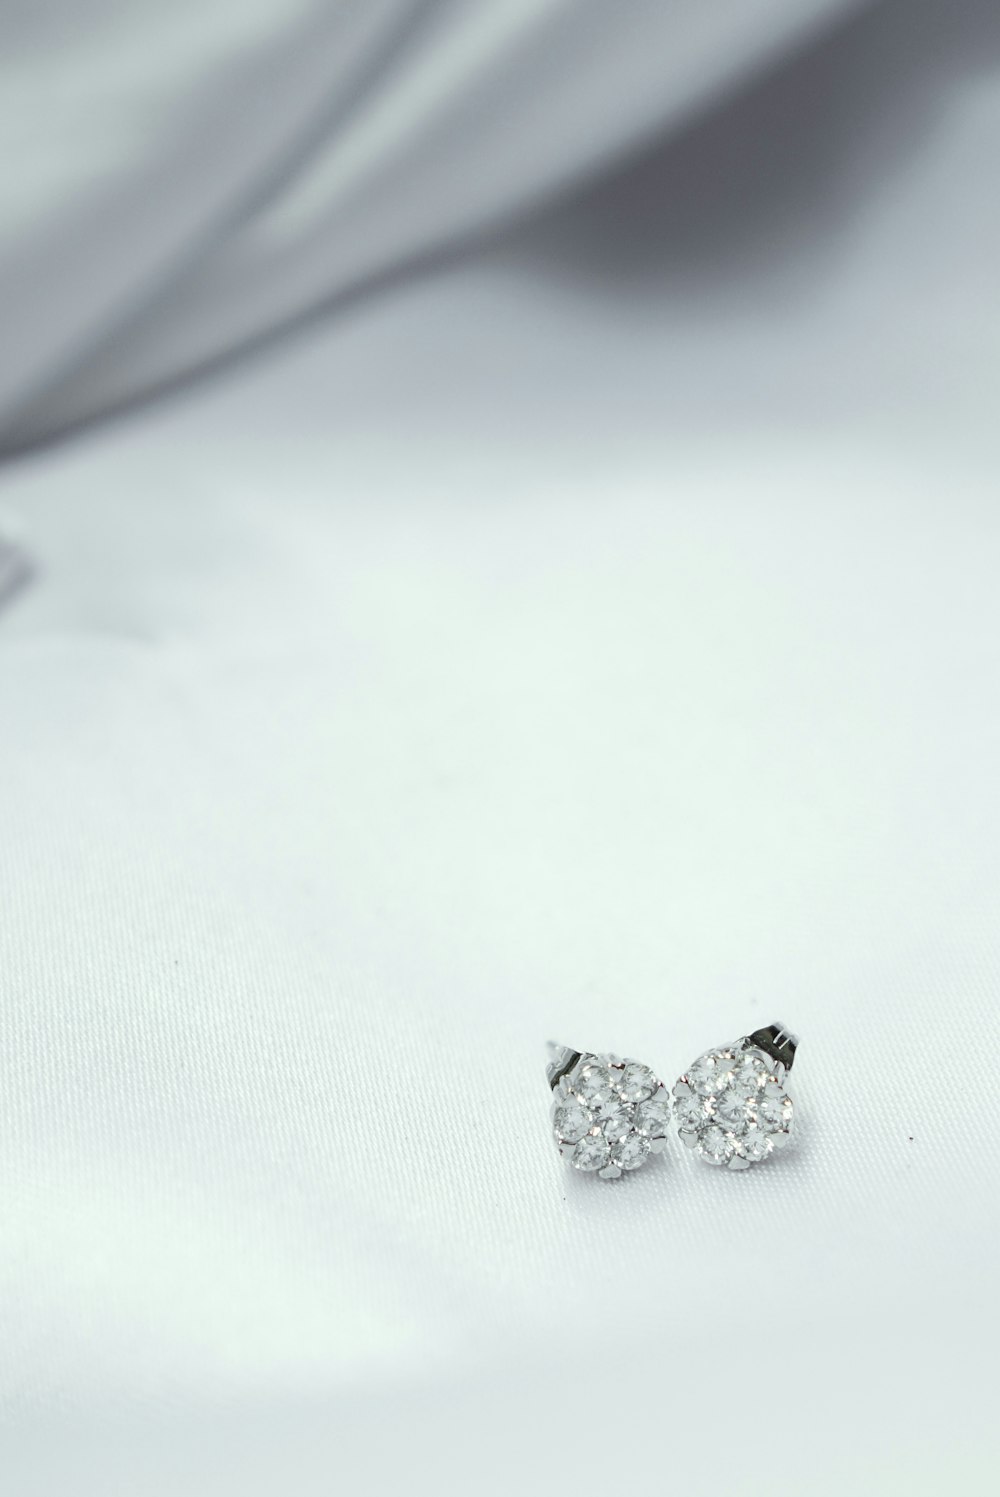 a pair of diamond earrings sitting on top of a white cloth